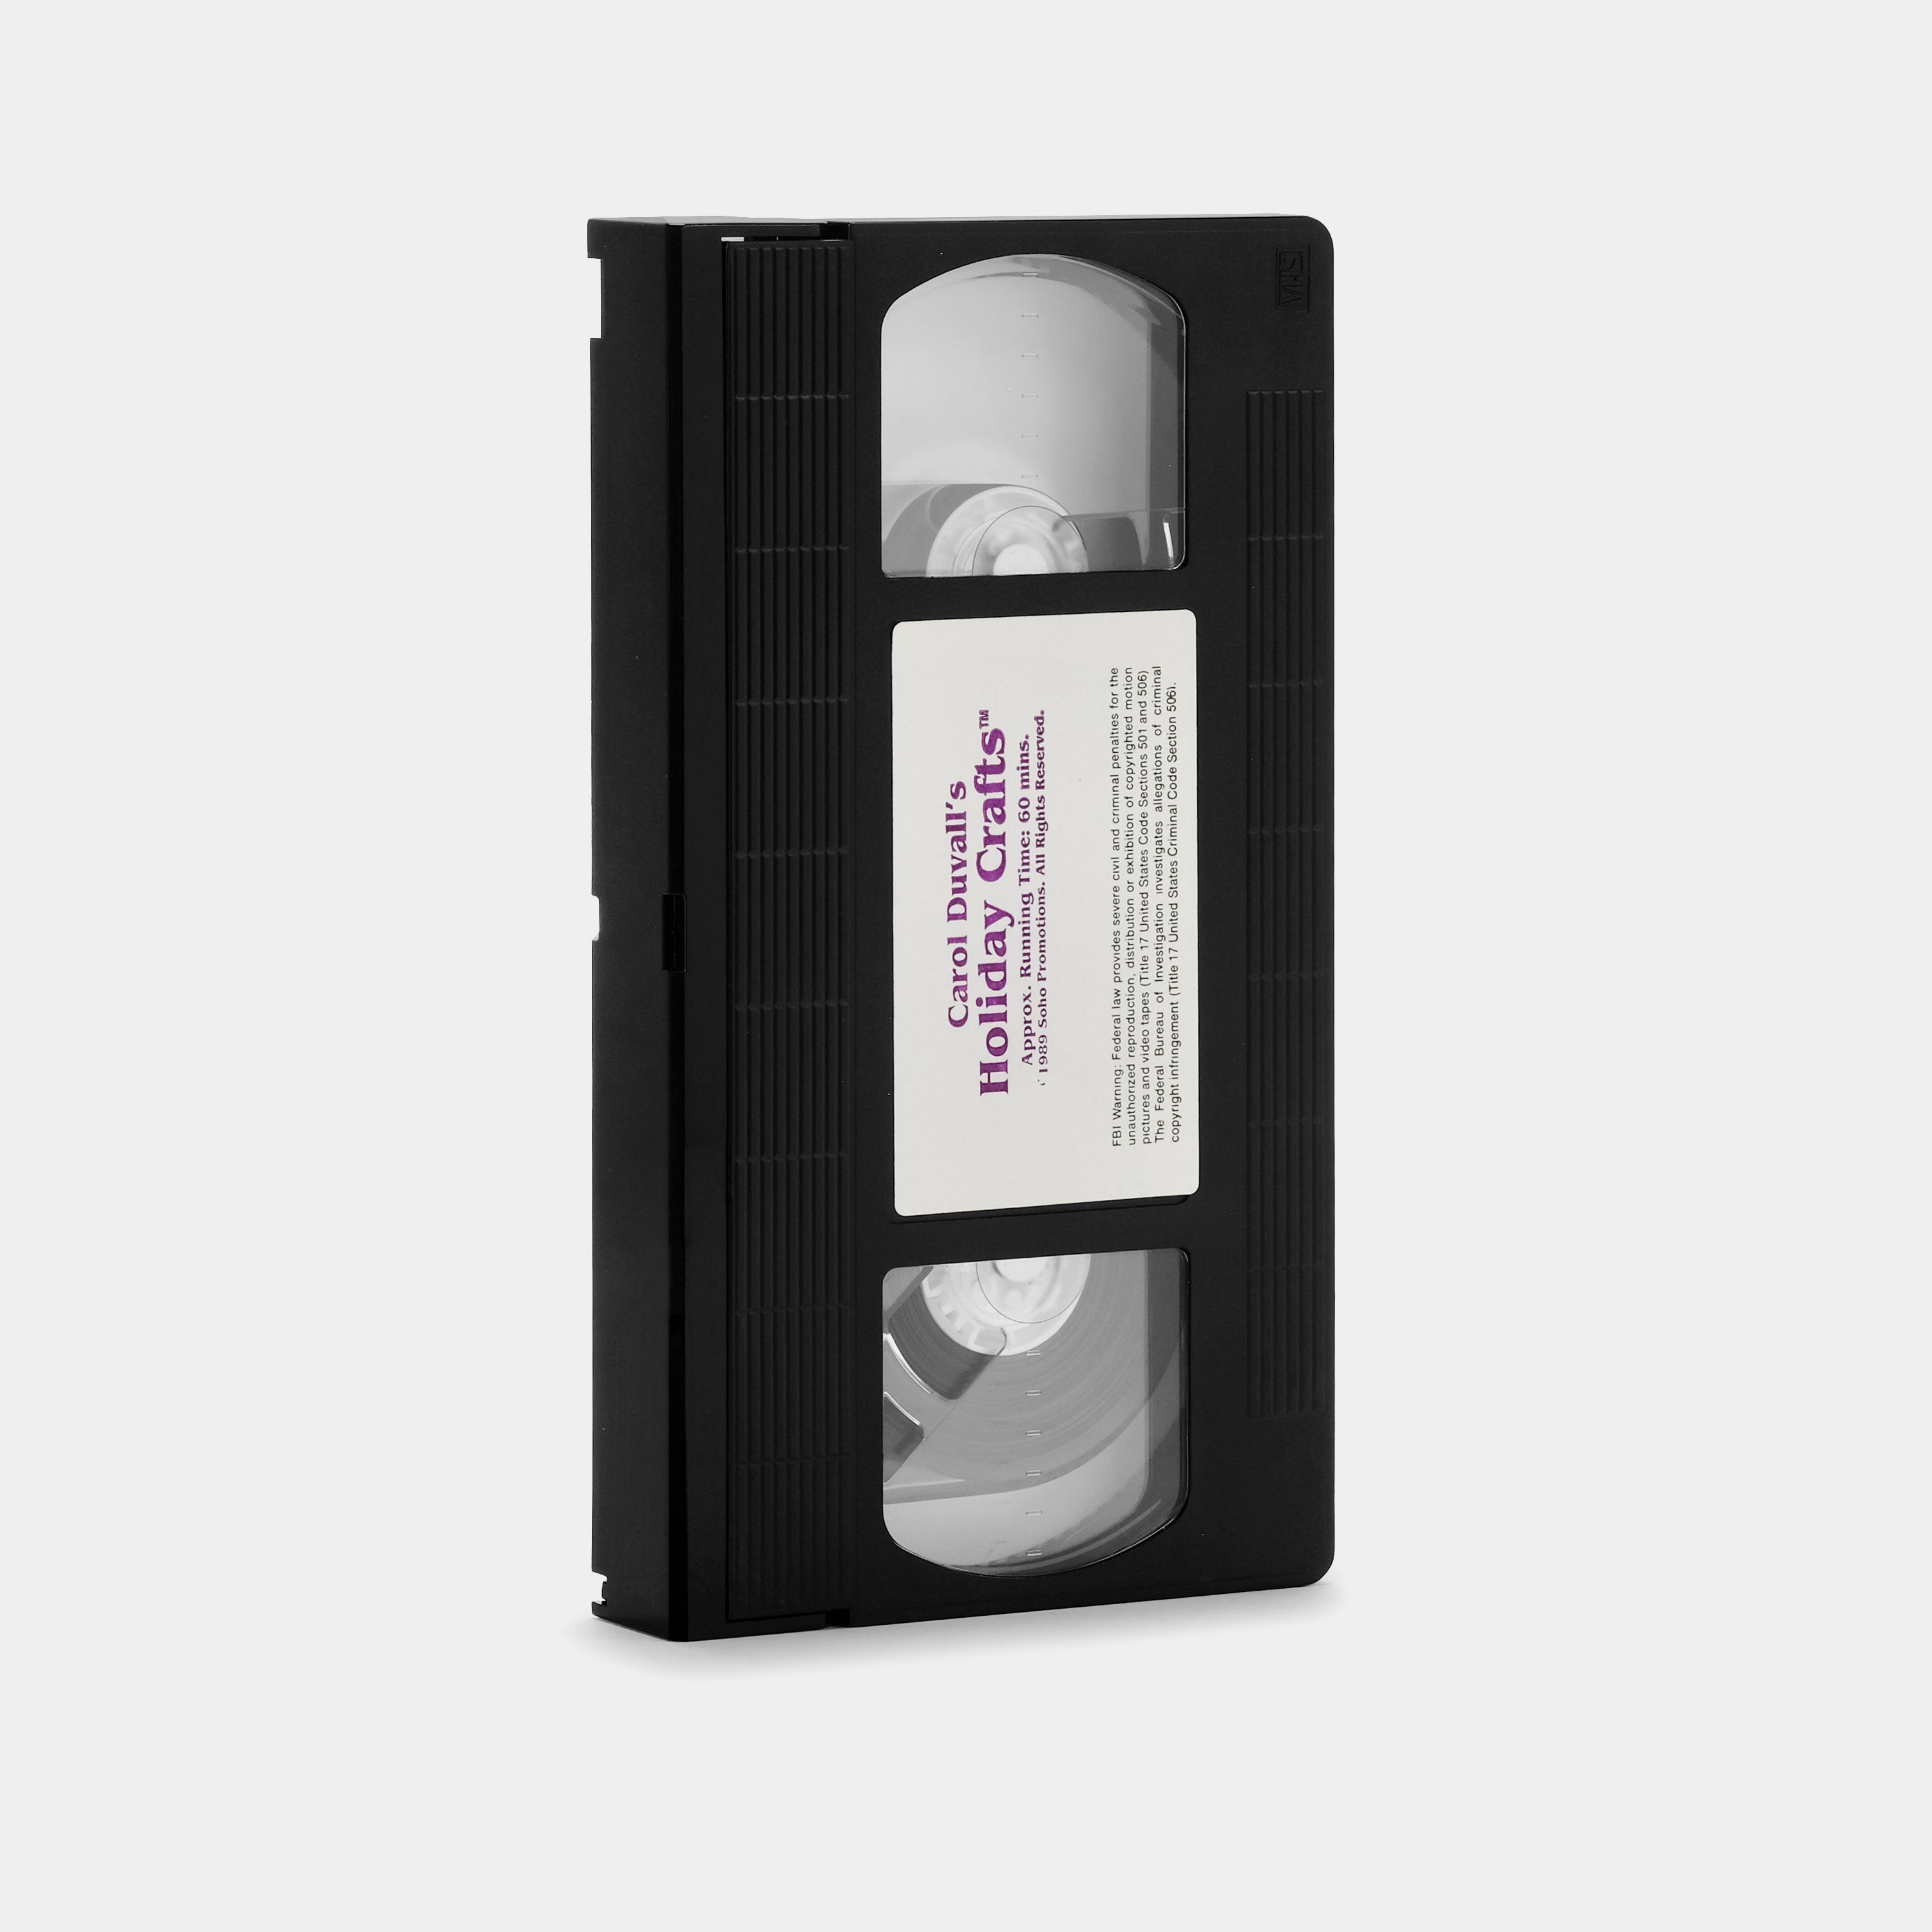 Carol Duvall's Holiday Crafts VHS Tape